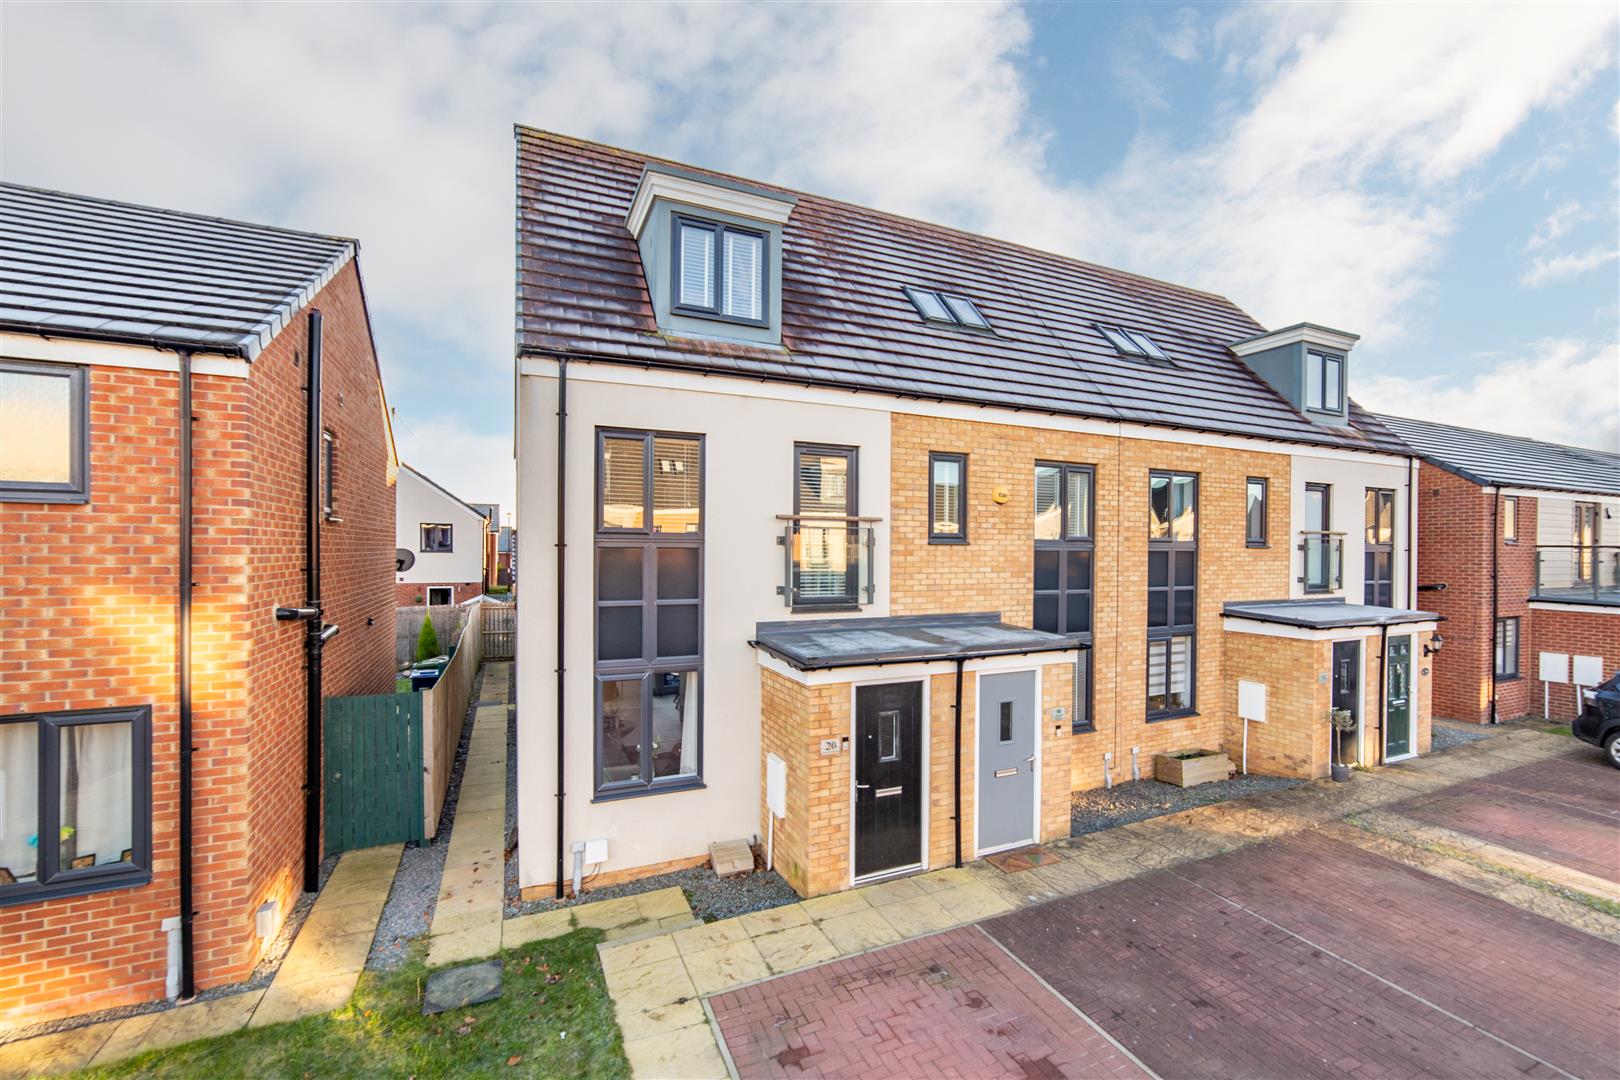 3 bed end of terrace house for sale in Greville Gardens, Great Park, NE13